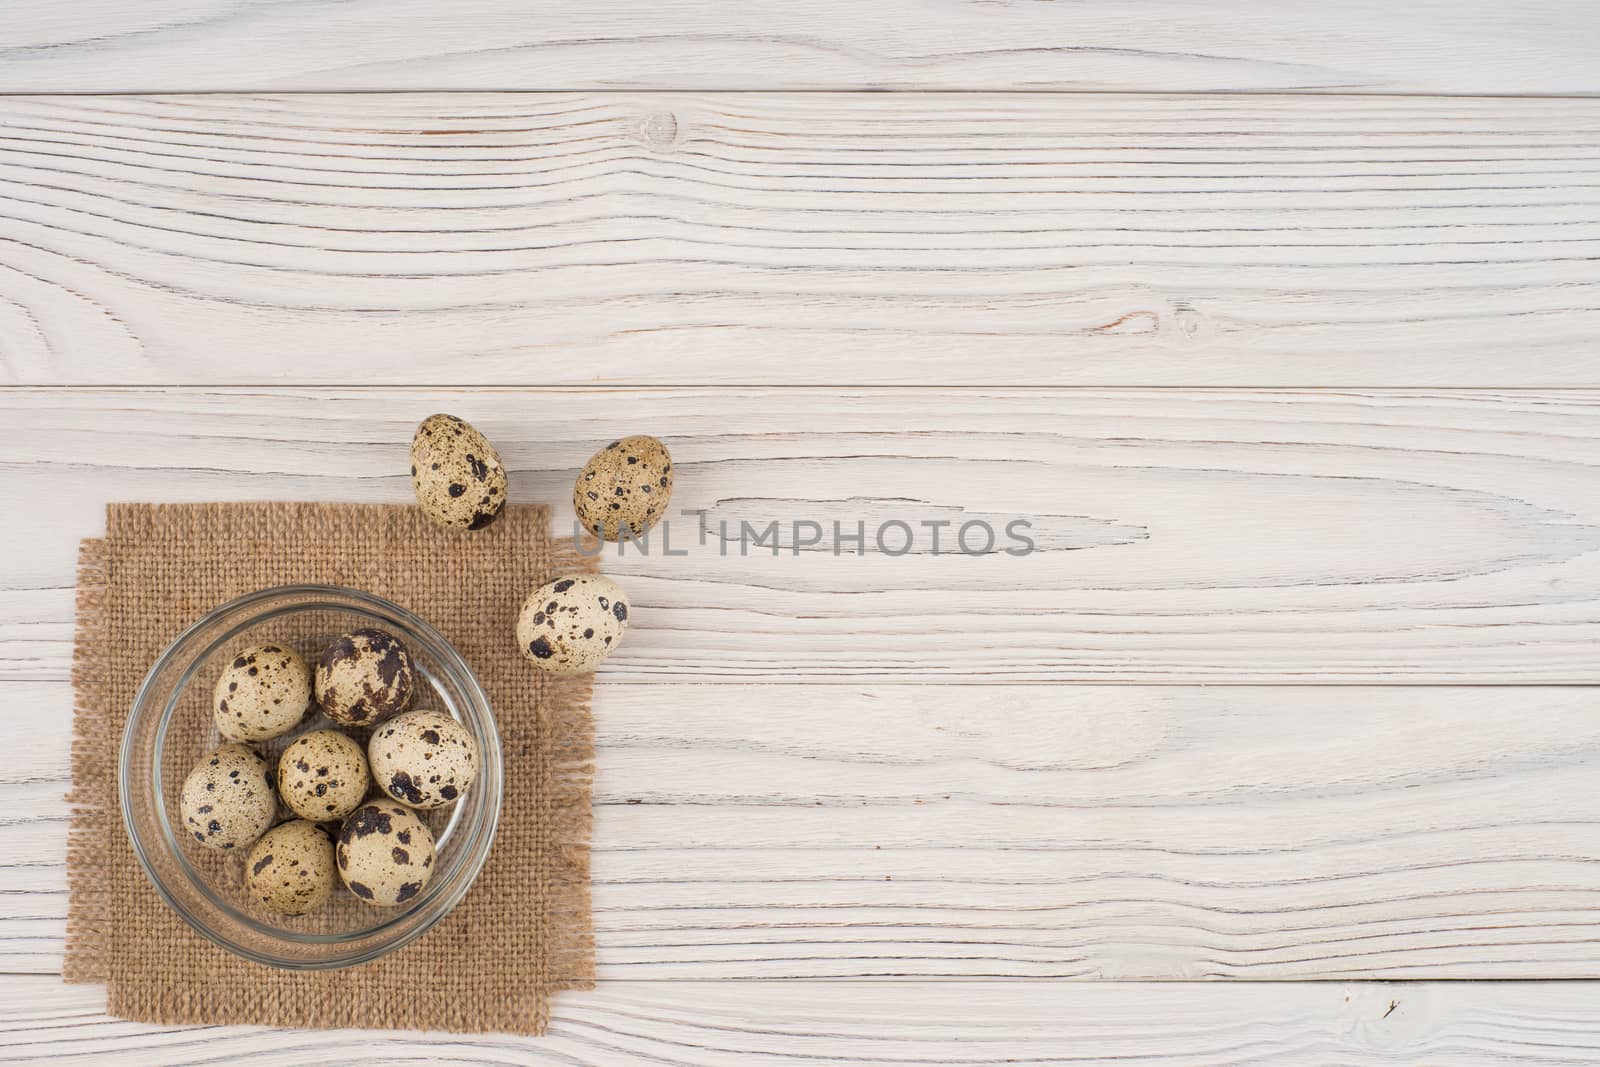 Quail eggs in a glass bowl on the old wooden table. Top view.